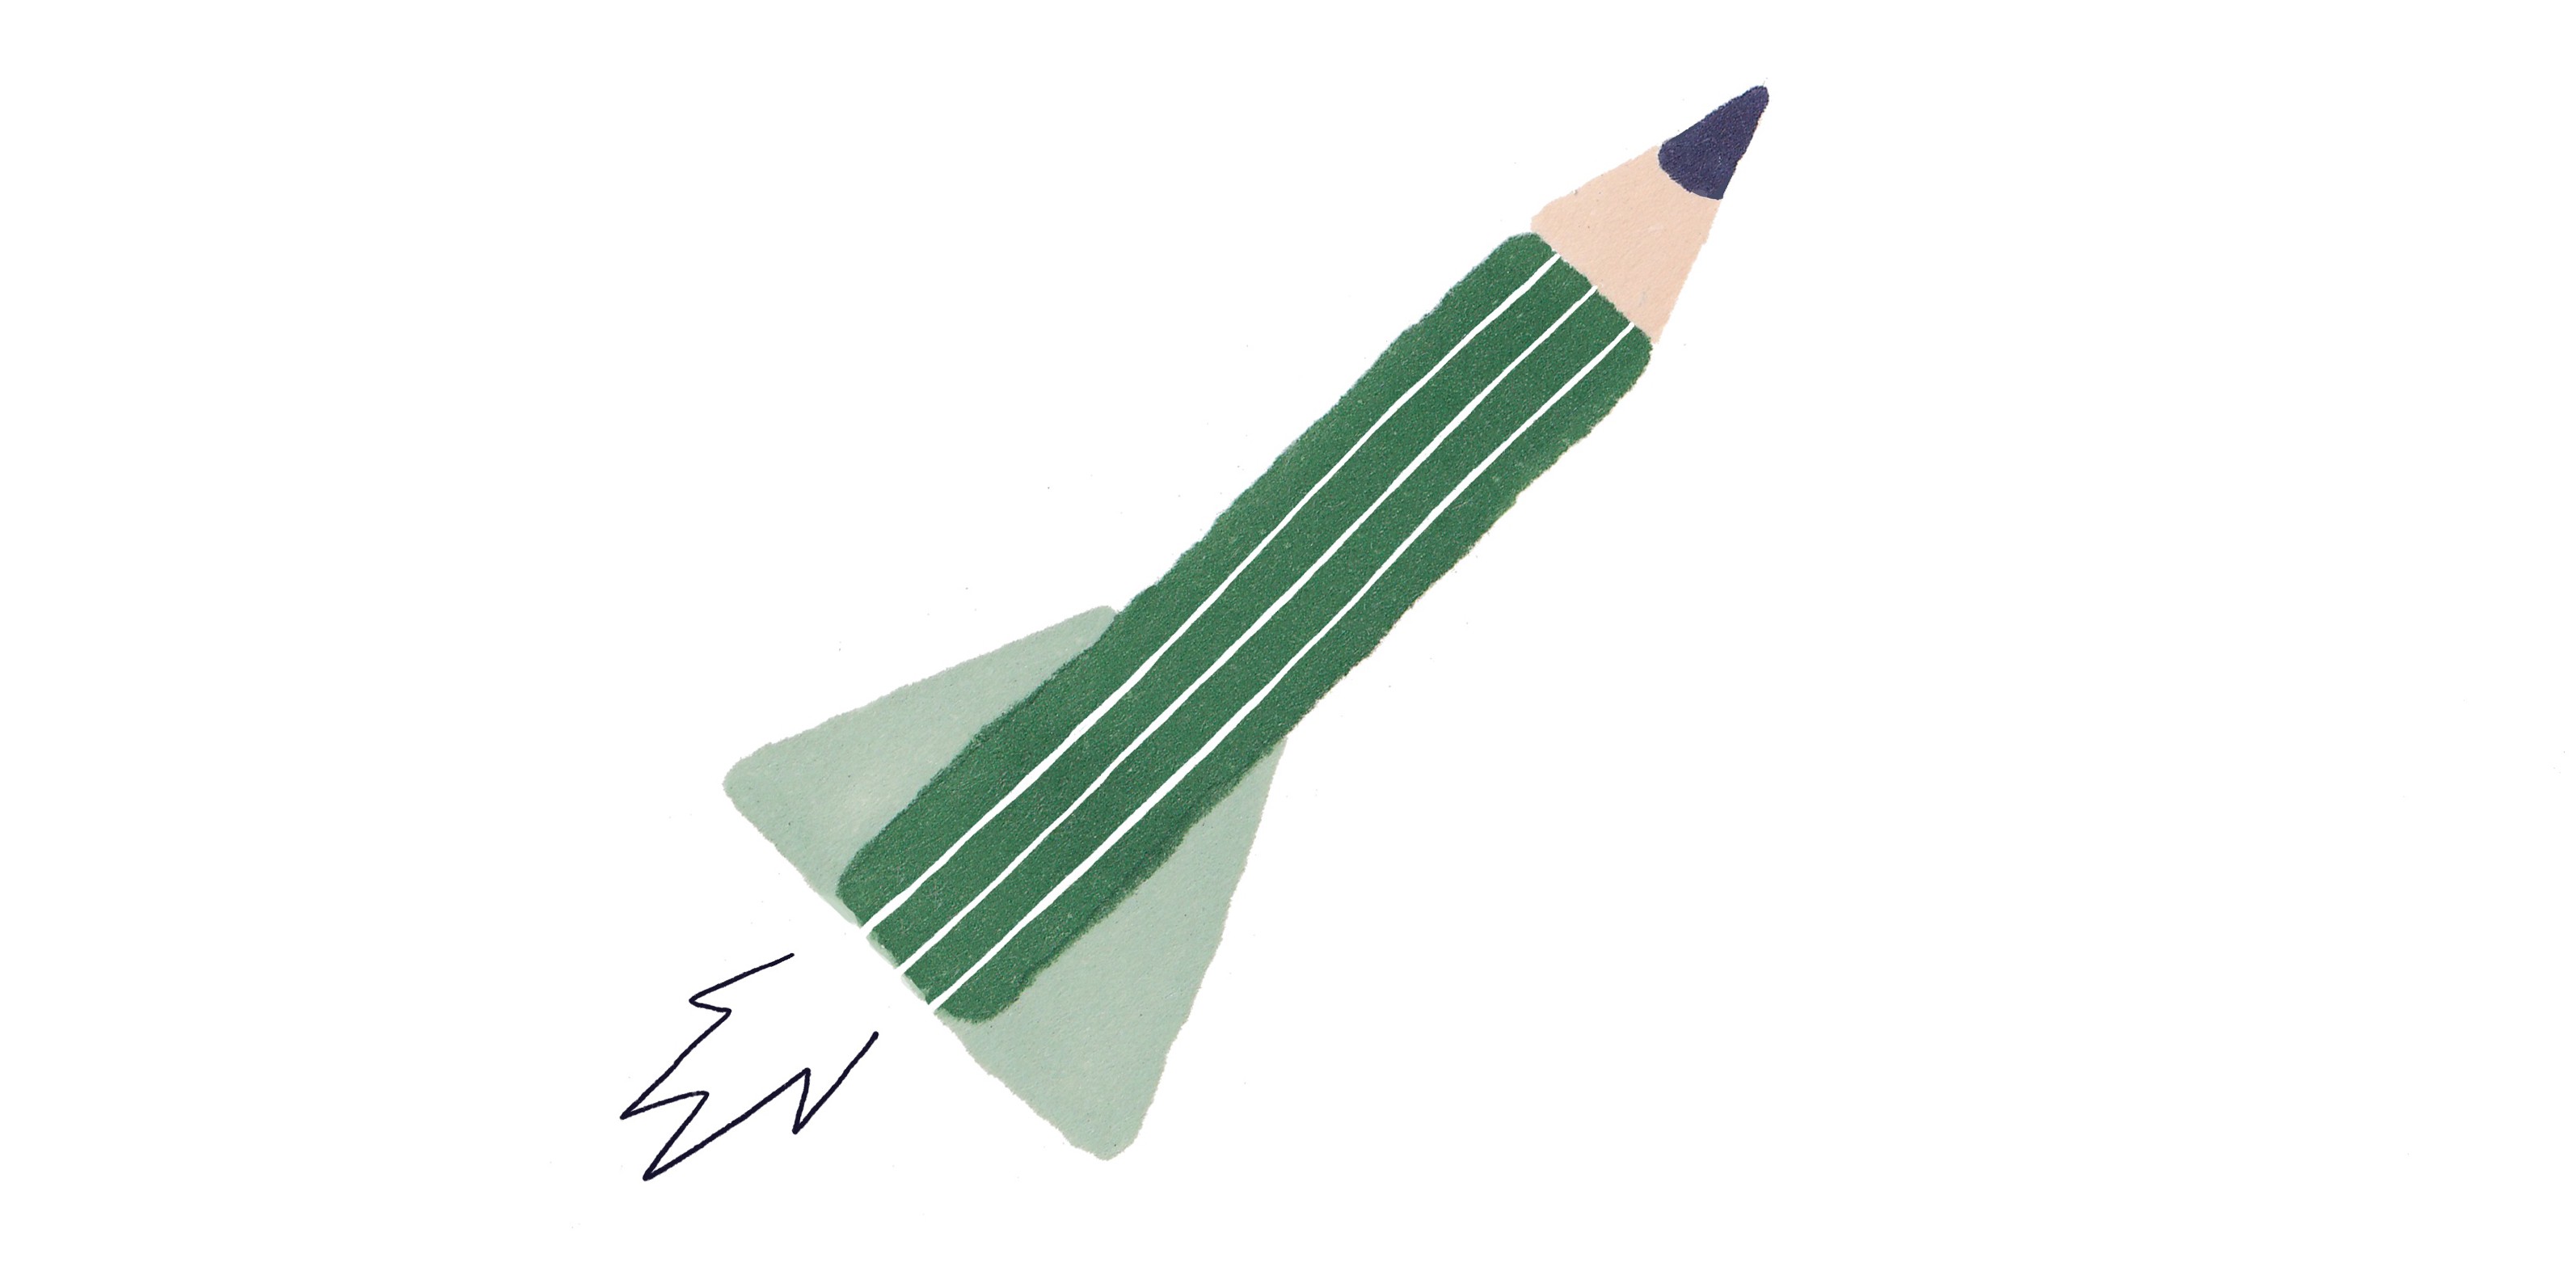 Illustration of a pencil shaped space rocket